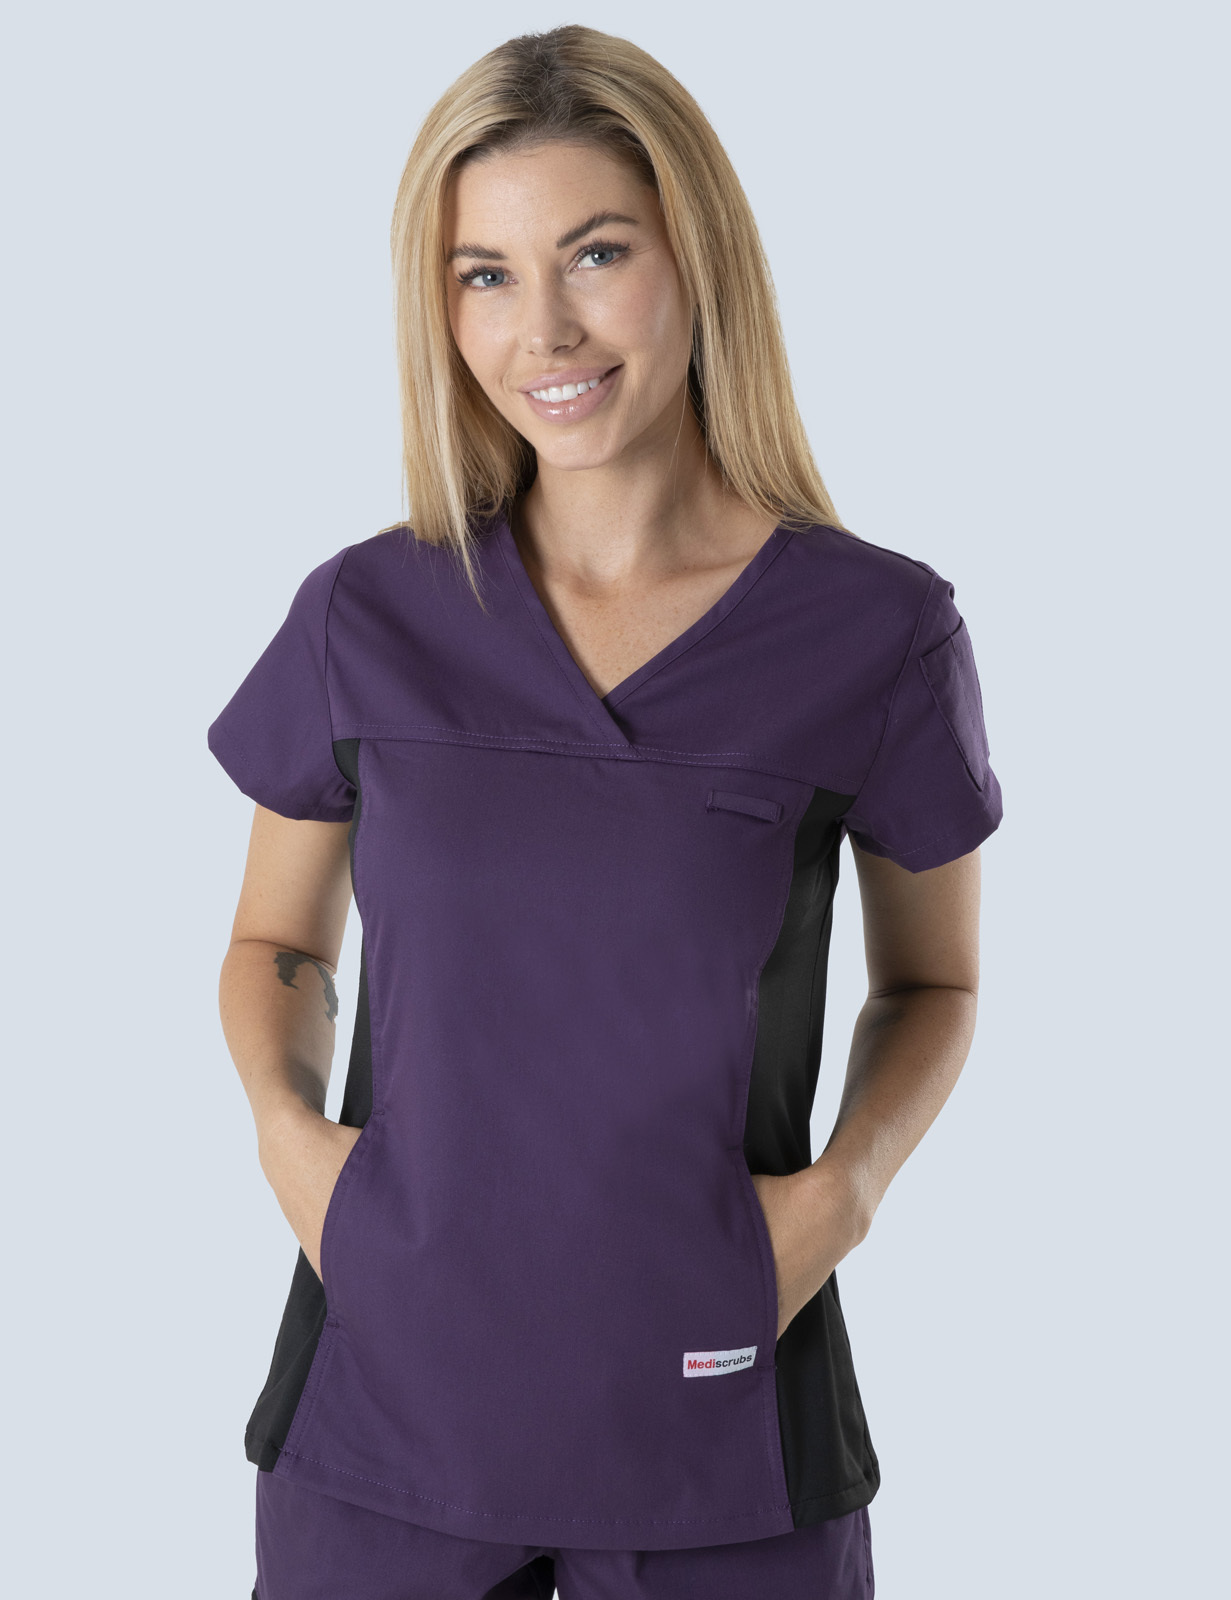 Tweed Hospital Pharmacy - ADMINISTRATION - Aubergine Women's Fit Solid Scrub Top with Spandex Panel